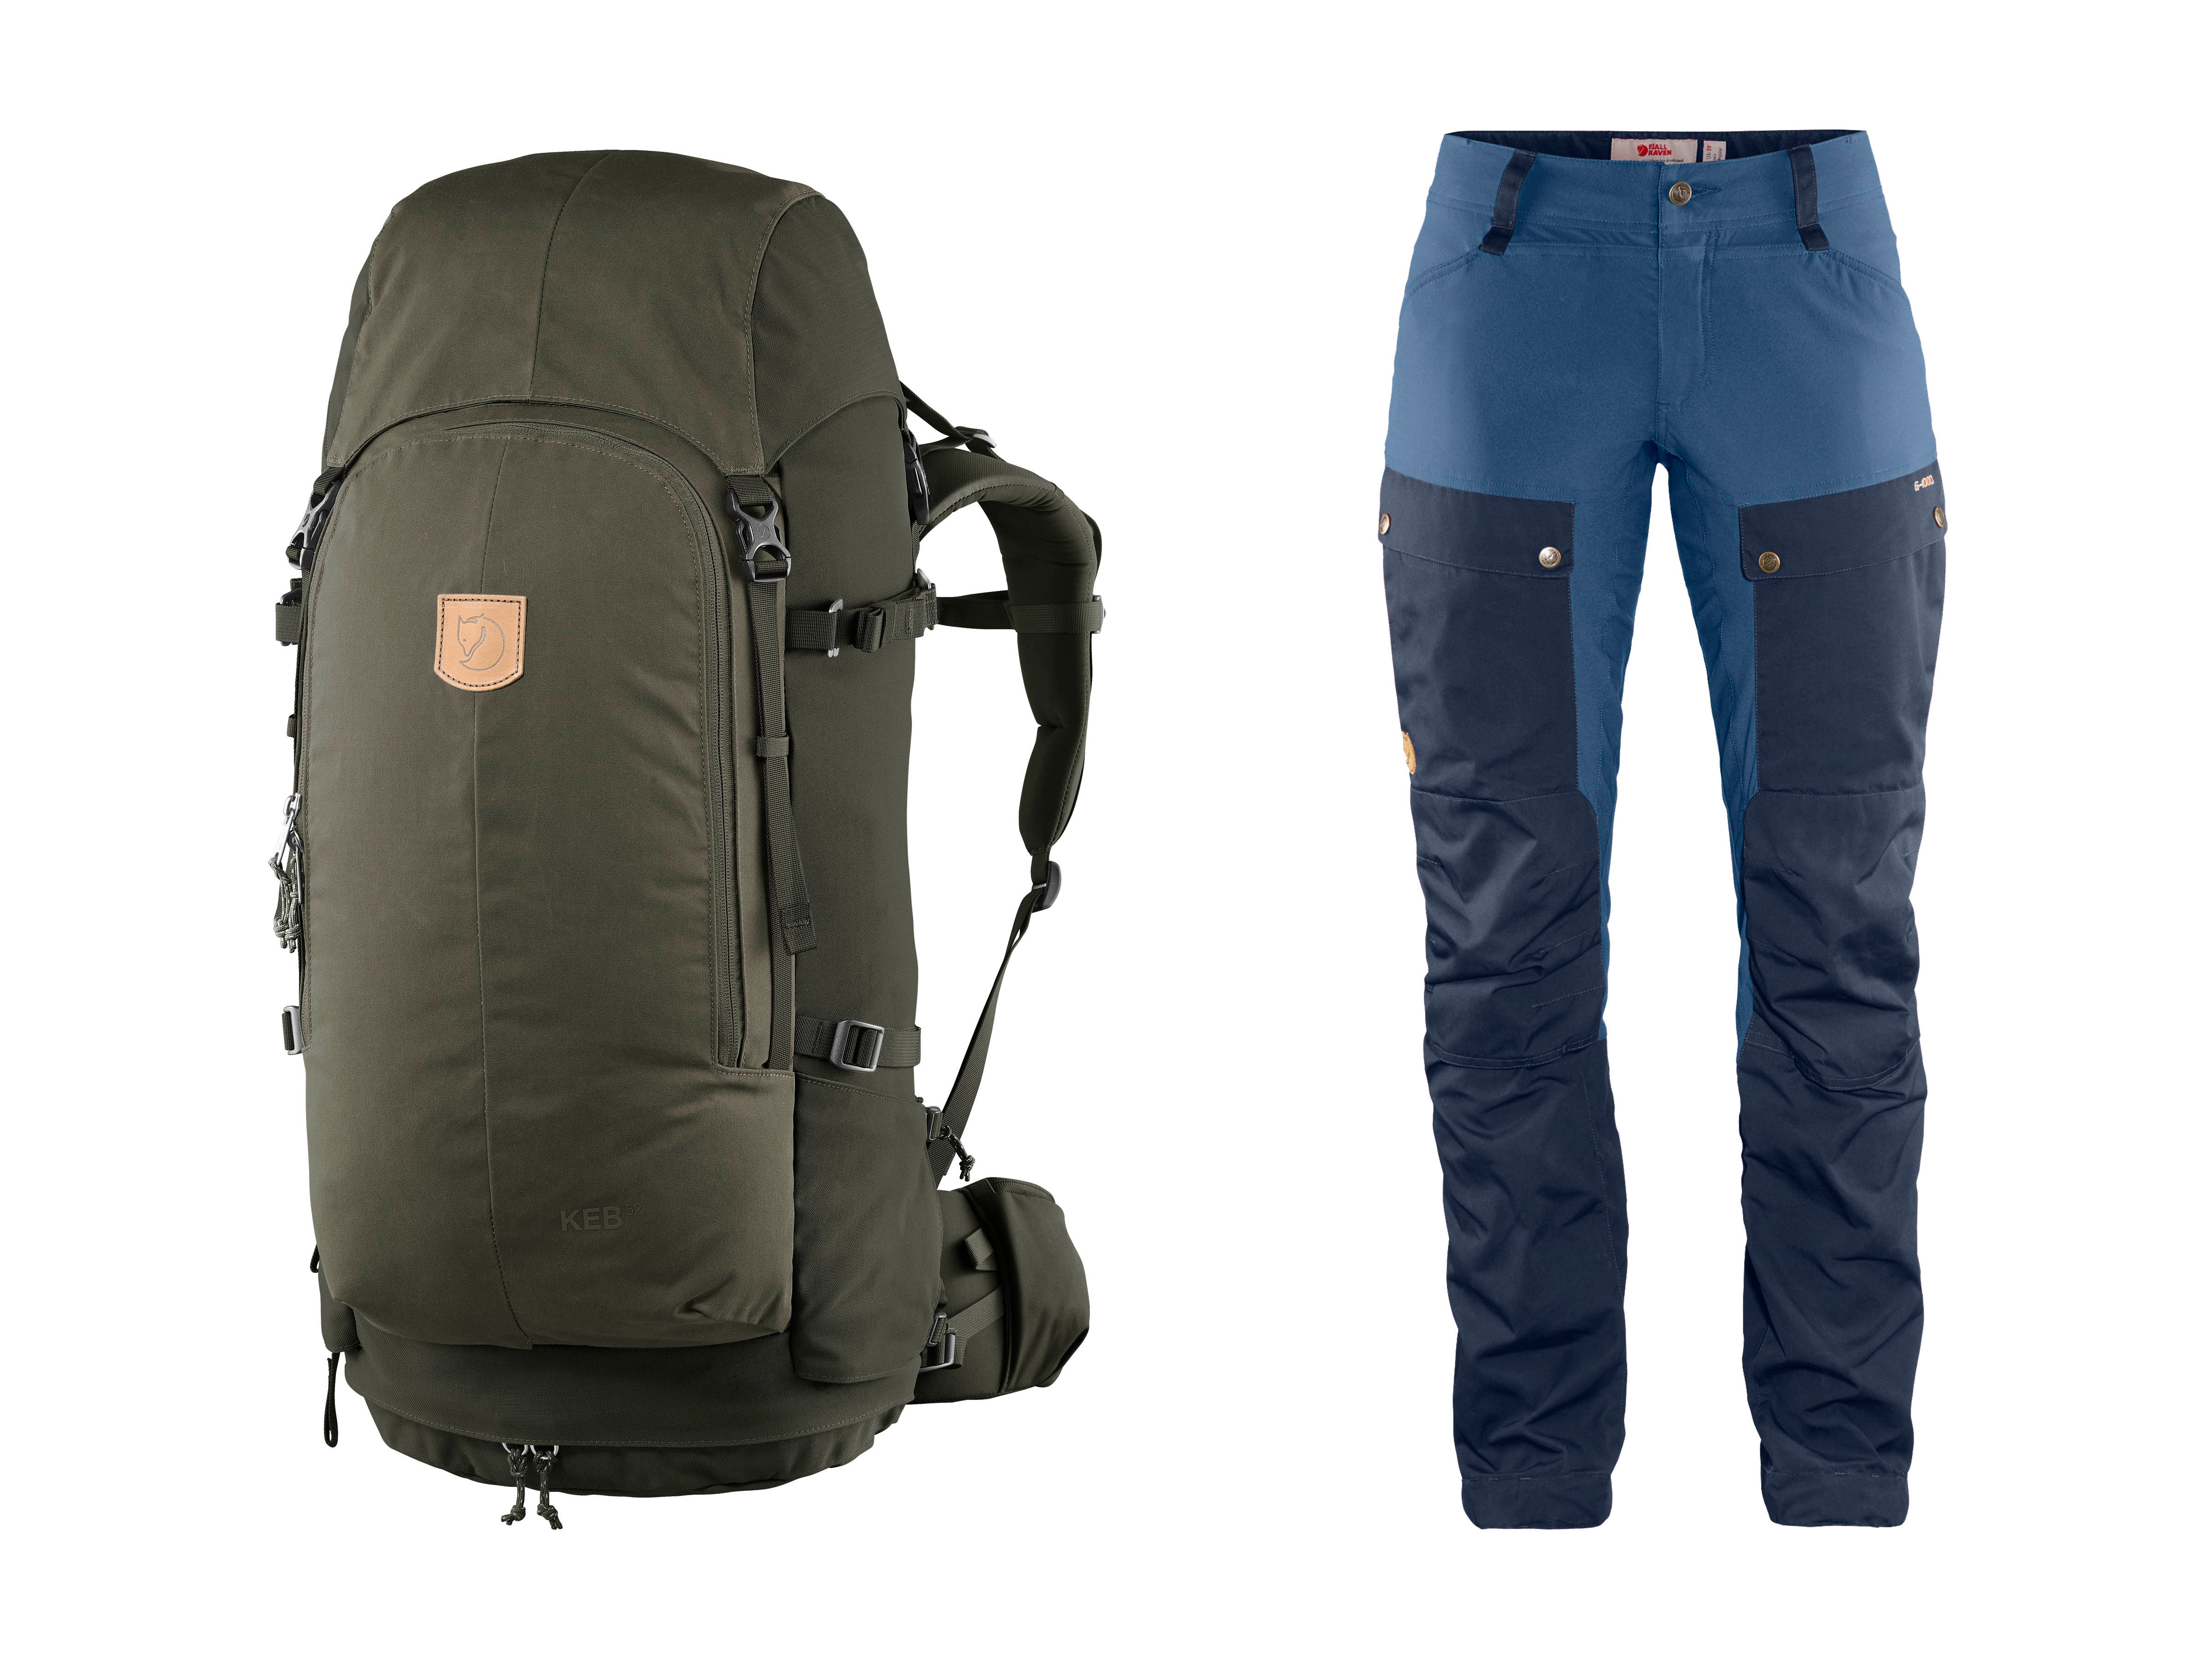 Ross’s favourites: the Keb 52 Backpack and the Keb Trousers